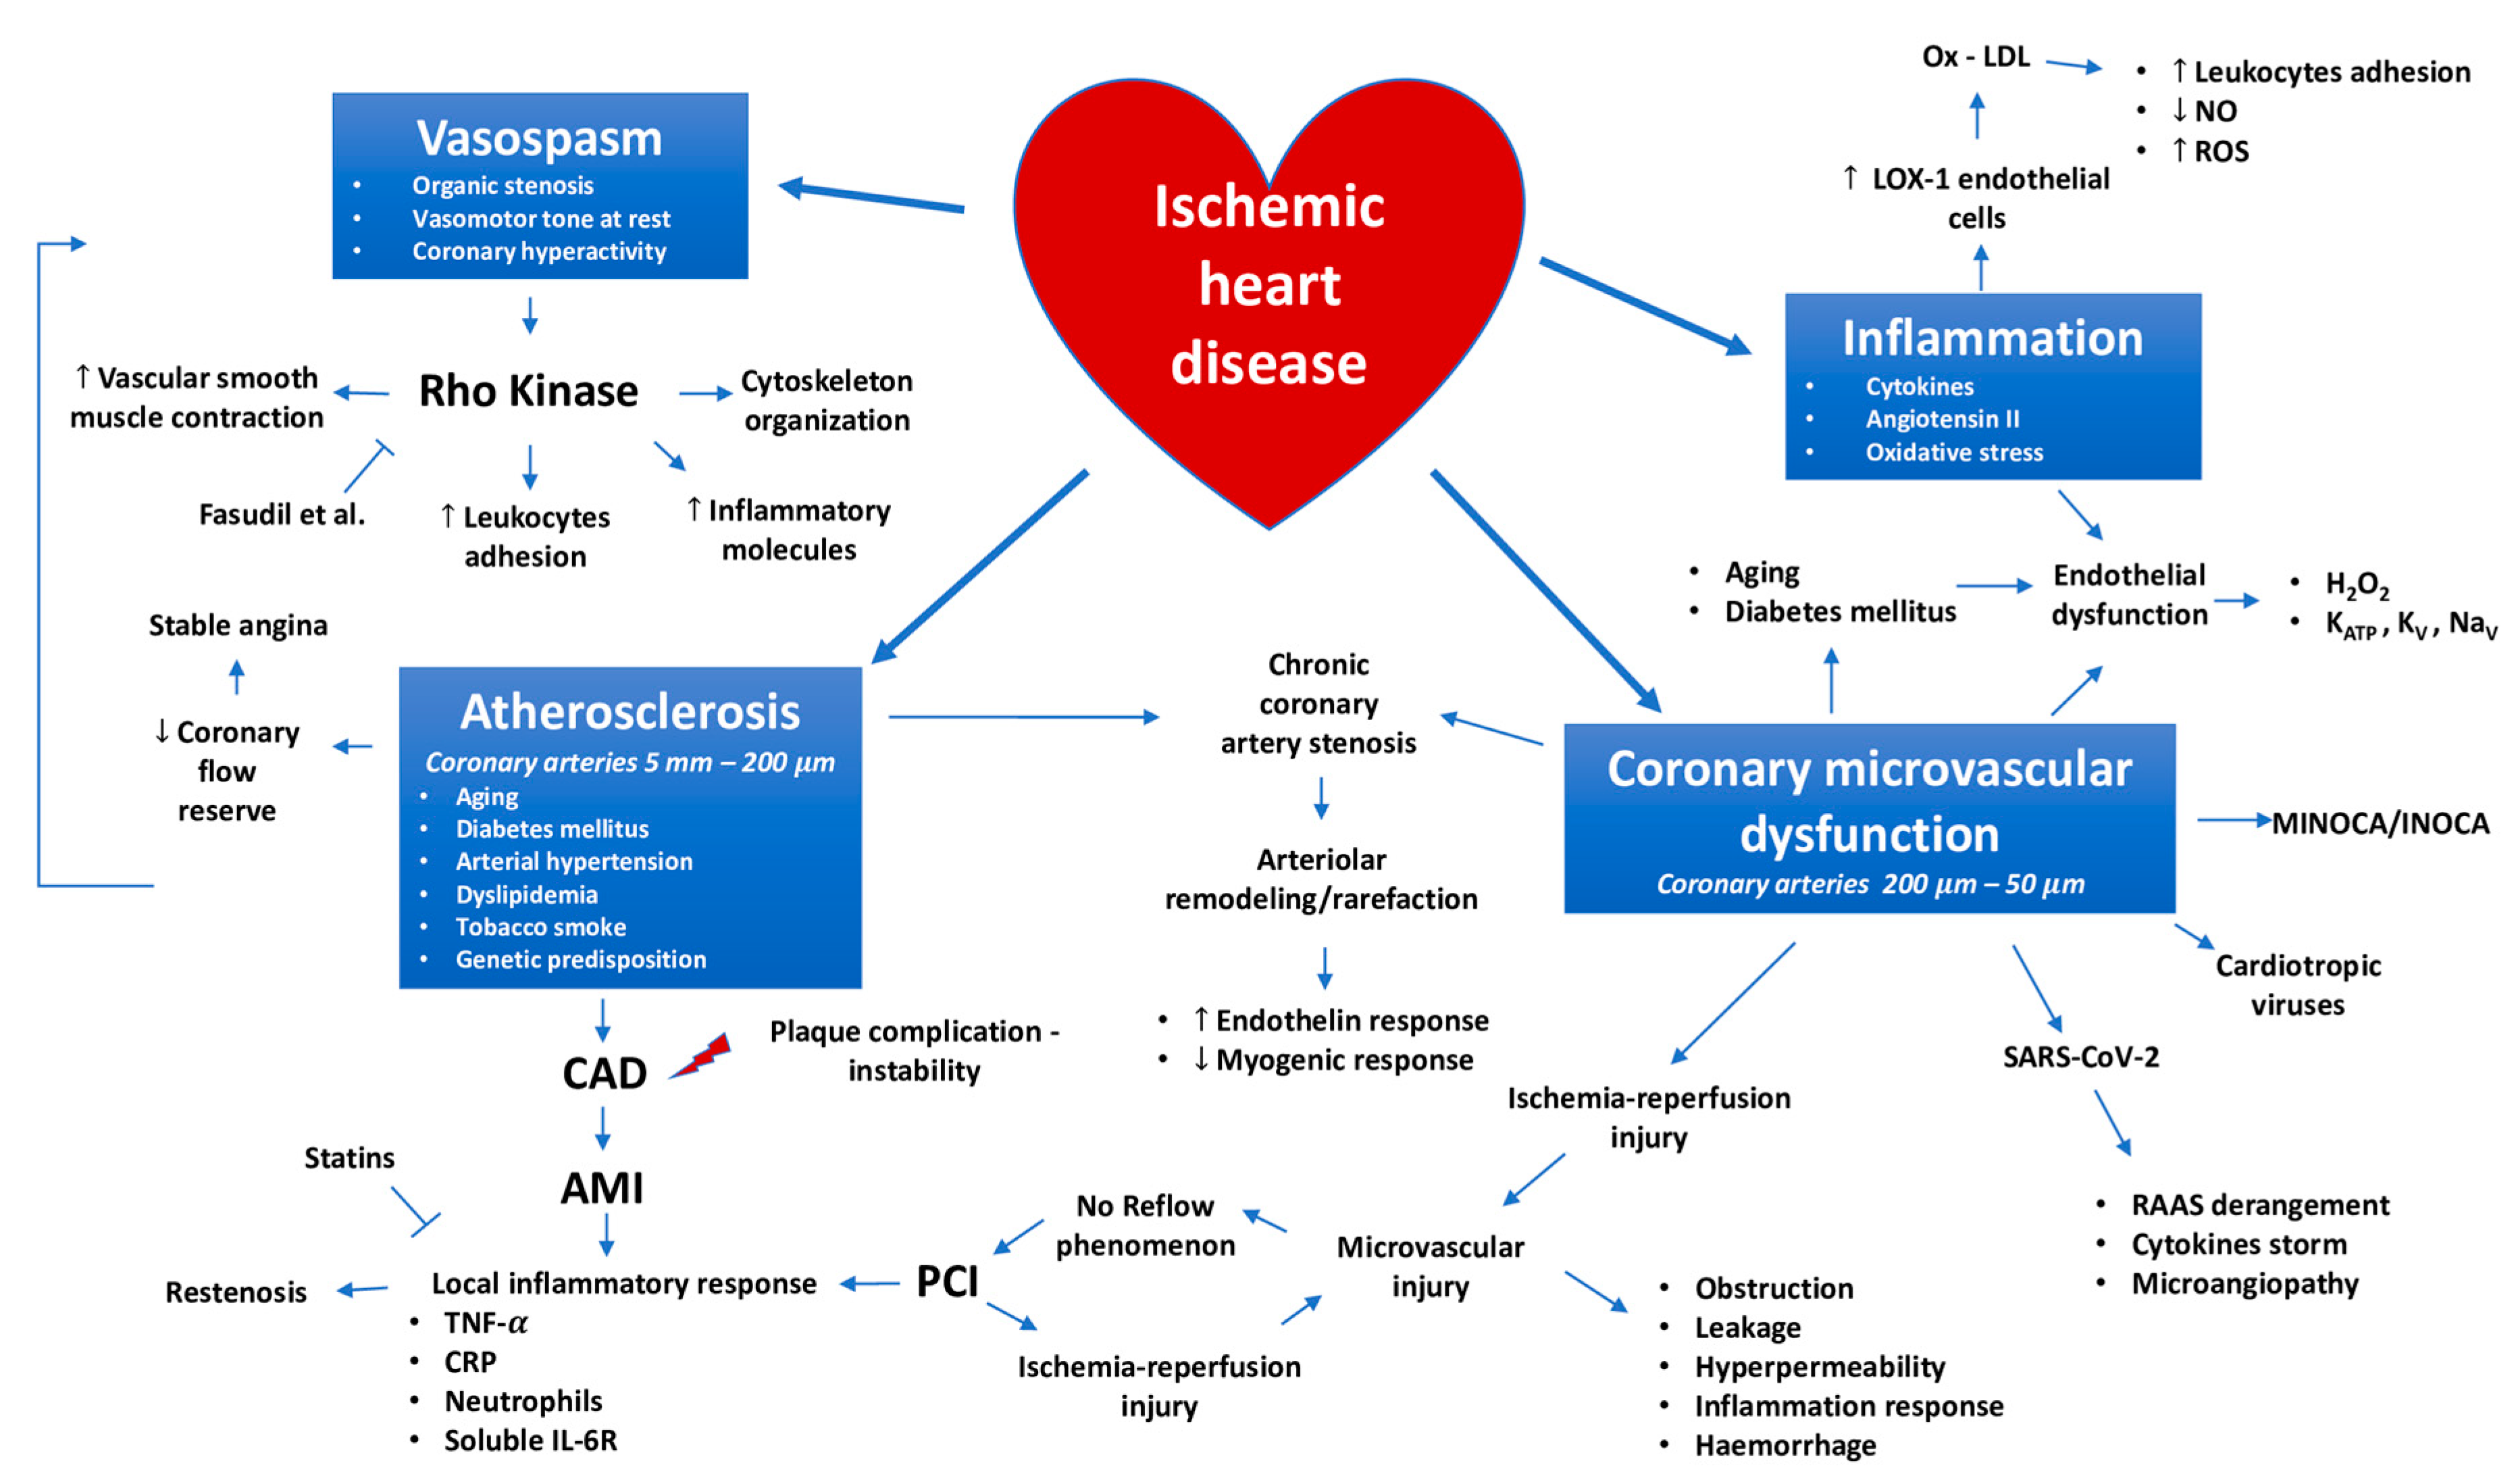 IJMS | Free Full-Text | Ischemic Heart Disease Pathophysiology Paradigms  Overview: From Plaque Activation to Microvascular Dysfunction